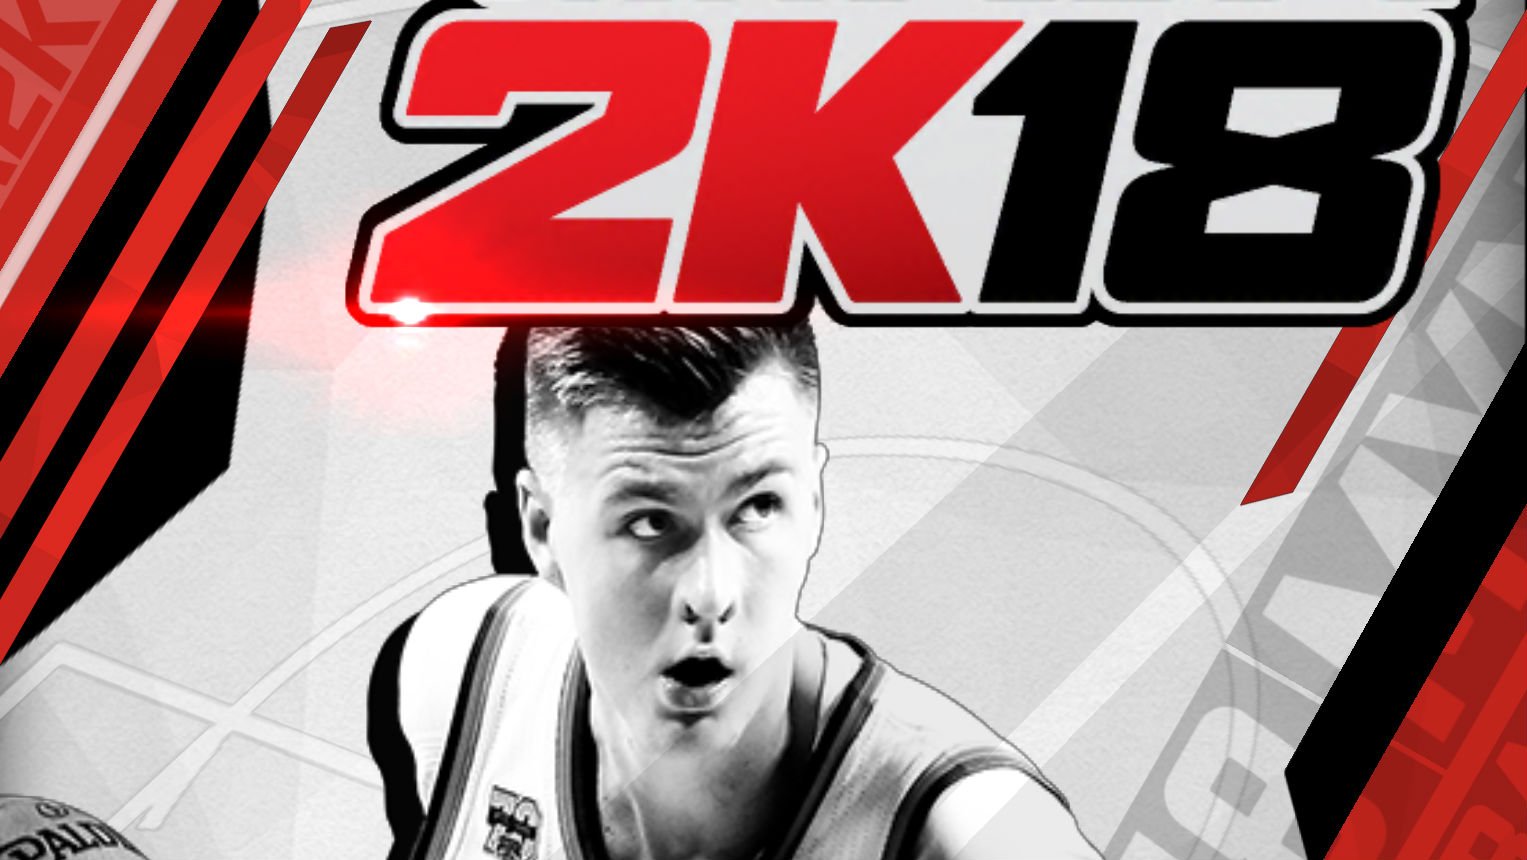 How to Earn VC for NBA 2K18 in My NBA 2K18